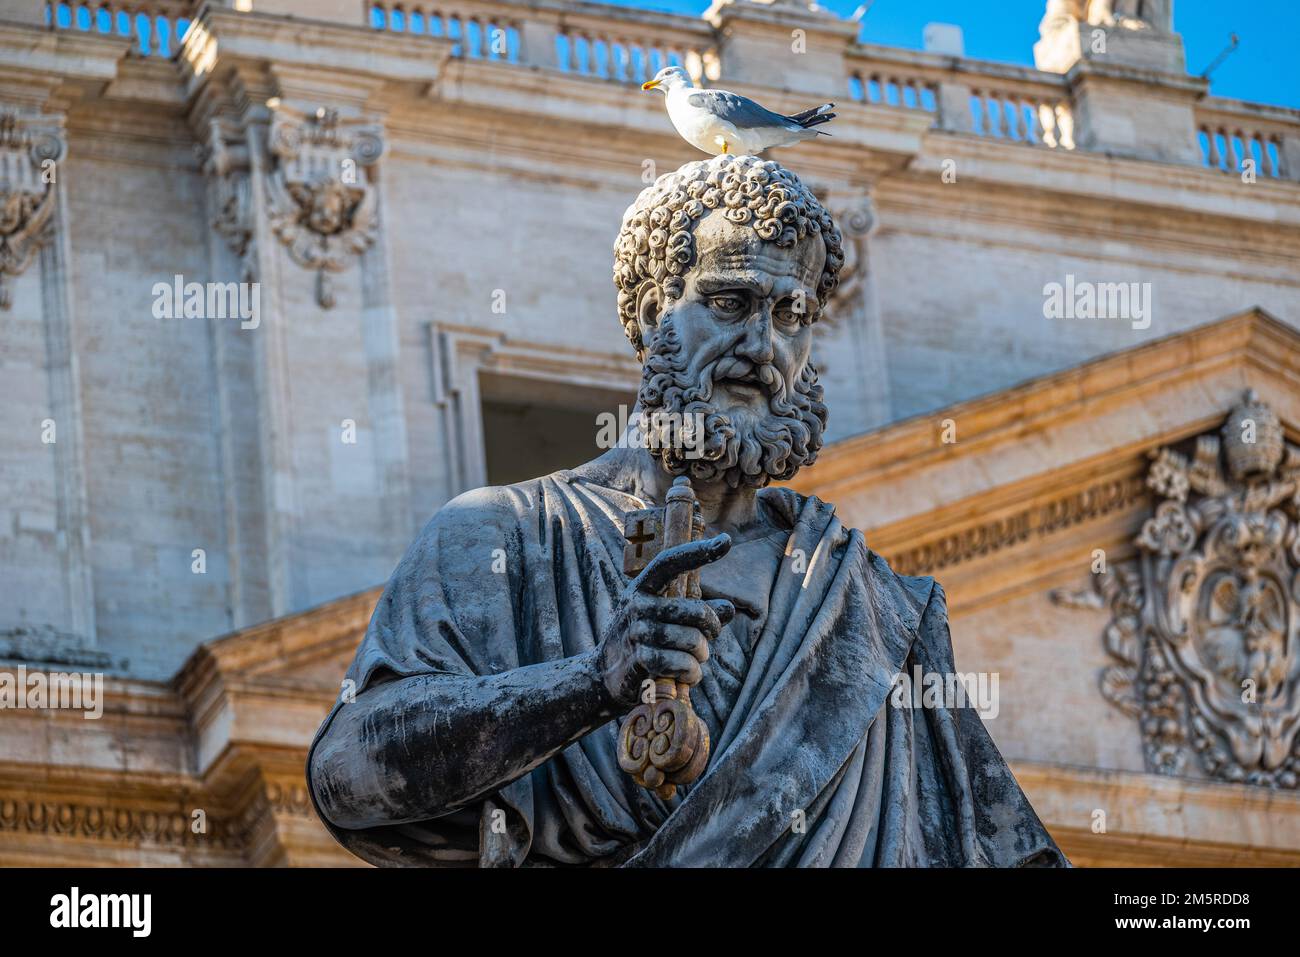 Seagull sitting on a head of a St Peter statue holding keys, a symbol of power, in front of the St. Peter's Basilica, centre of catholic religion. Stock Photo